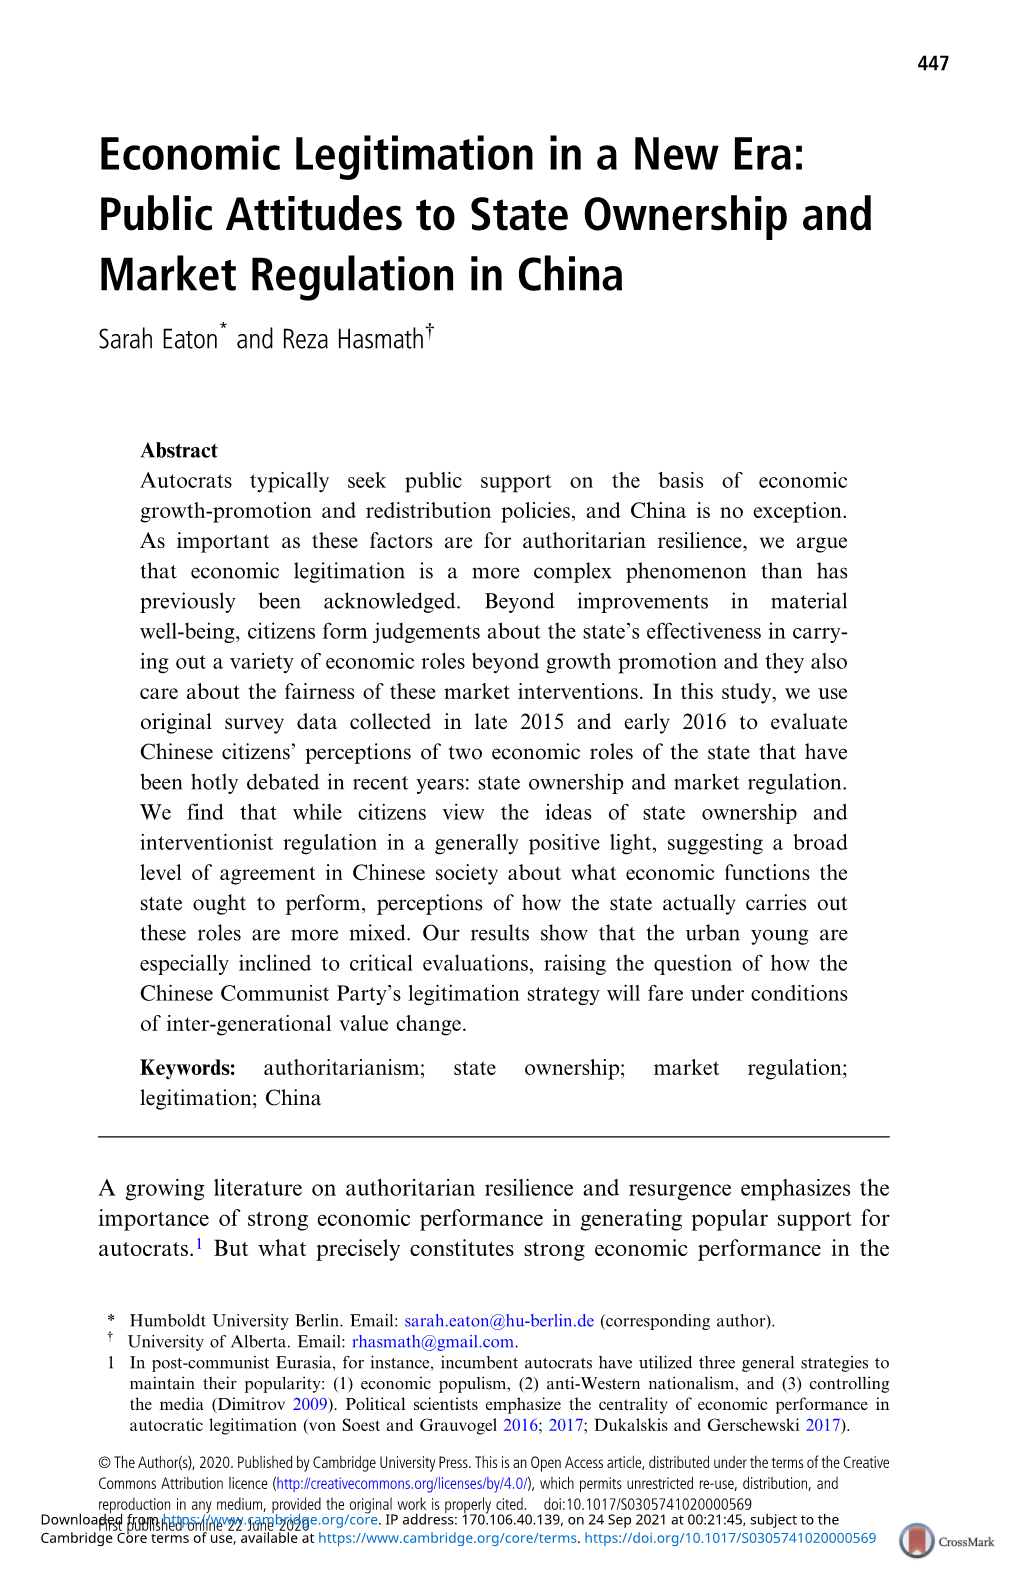 Public Attitudes to State Ownership and Market Regulation in China Sarah Eaton* and Reza Hasmath†